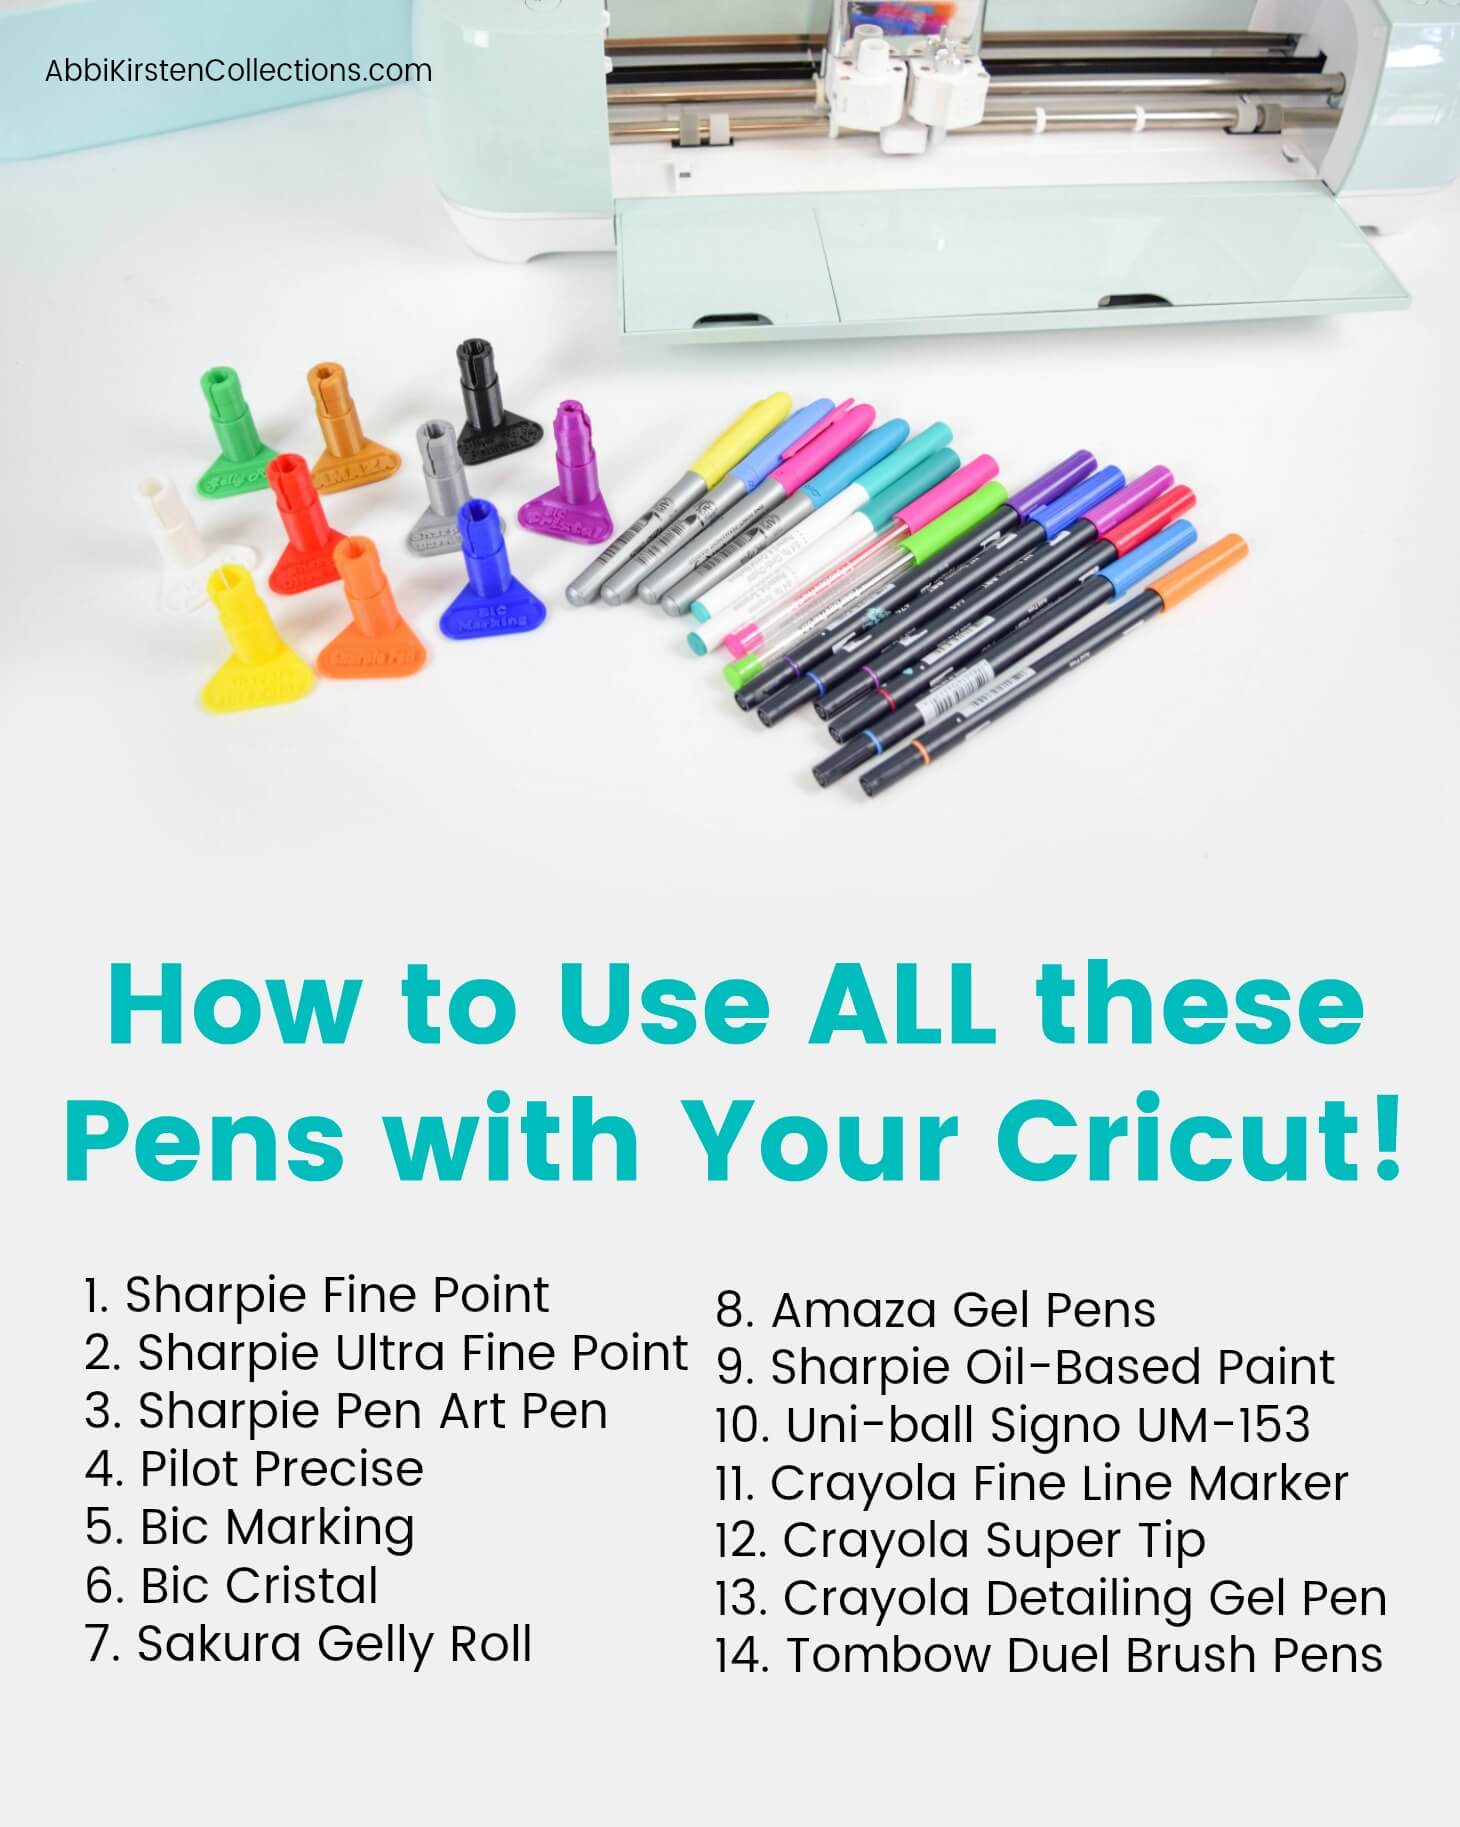 How to Use Any Pen with Your Cricut Machine: Cricut Pens Tutorial Story -  Abbi Kirsten Collections